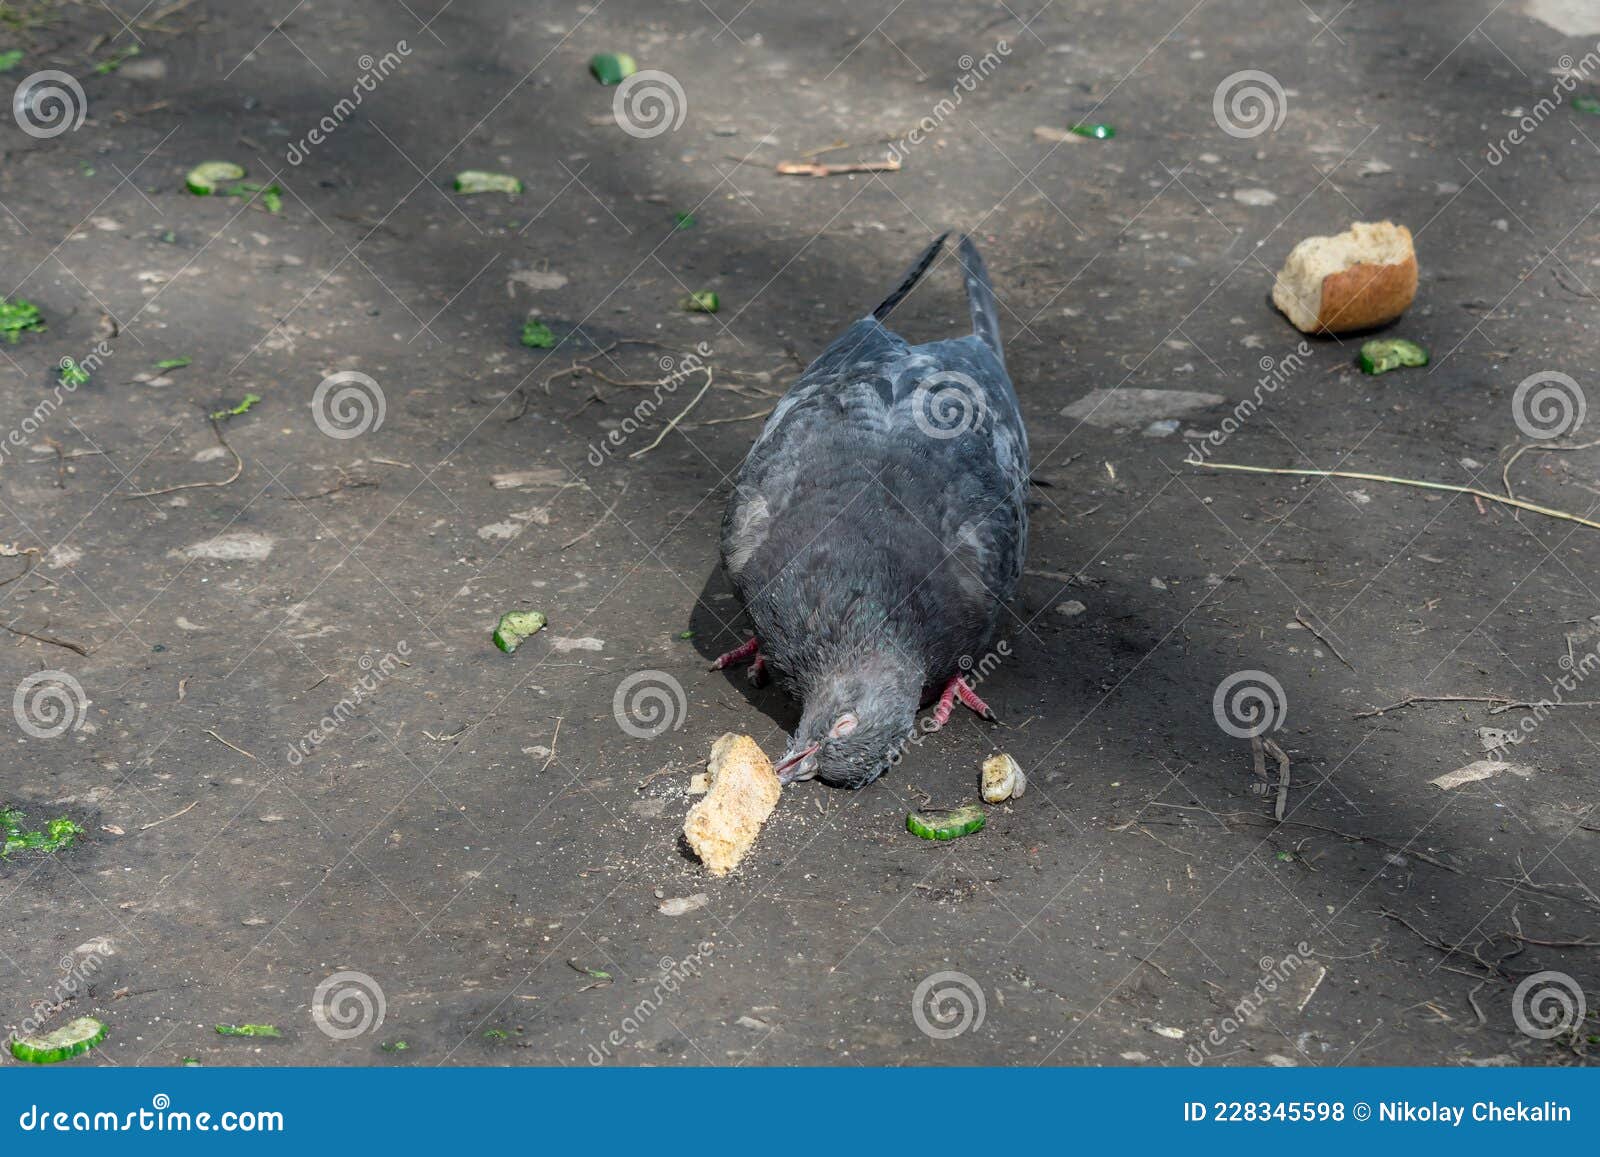 an old pigeon trying to peck a piece of bread